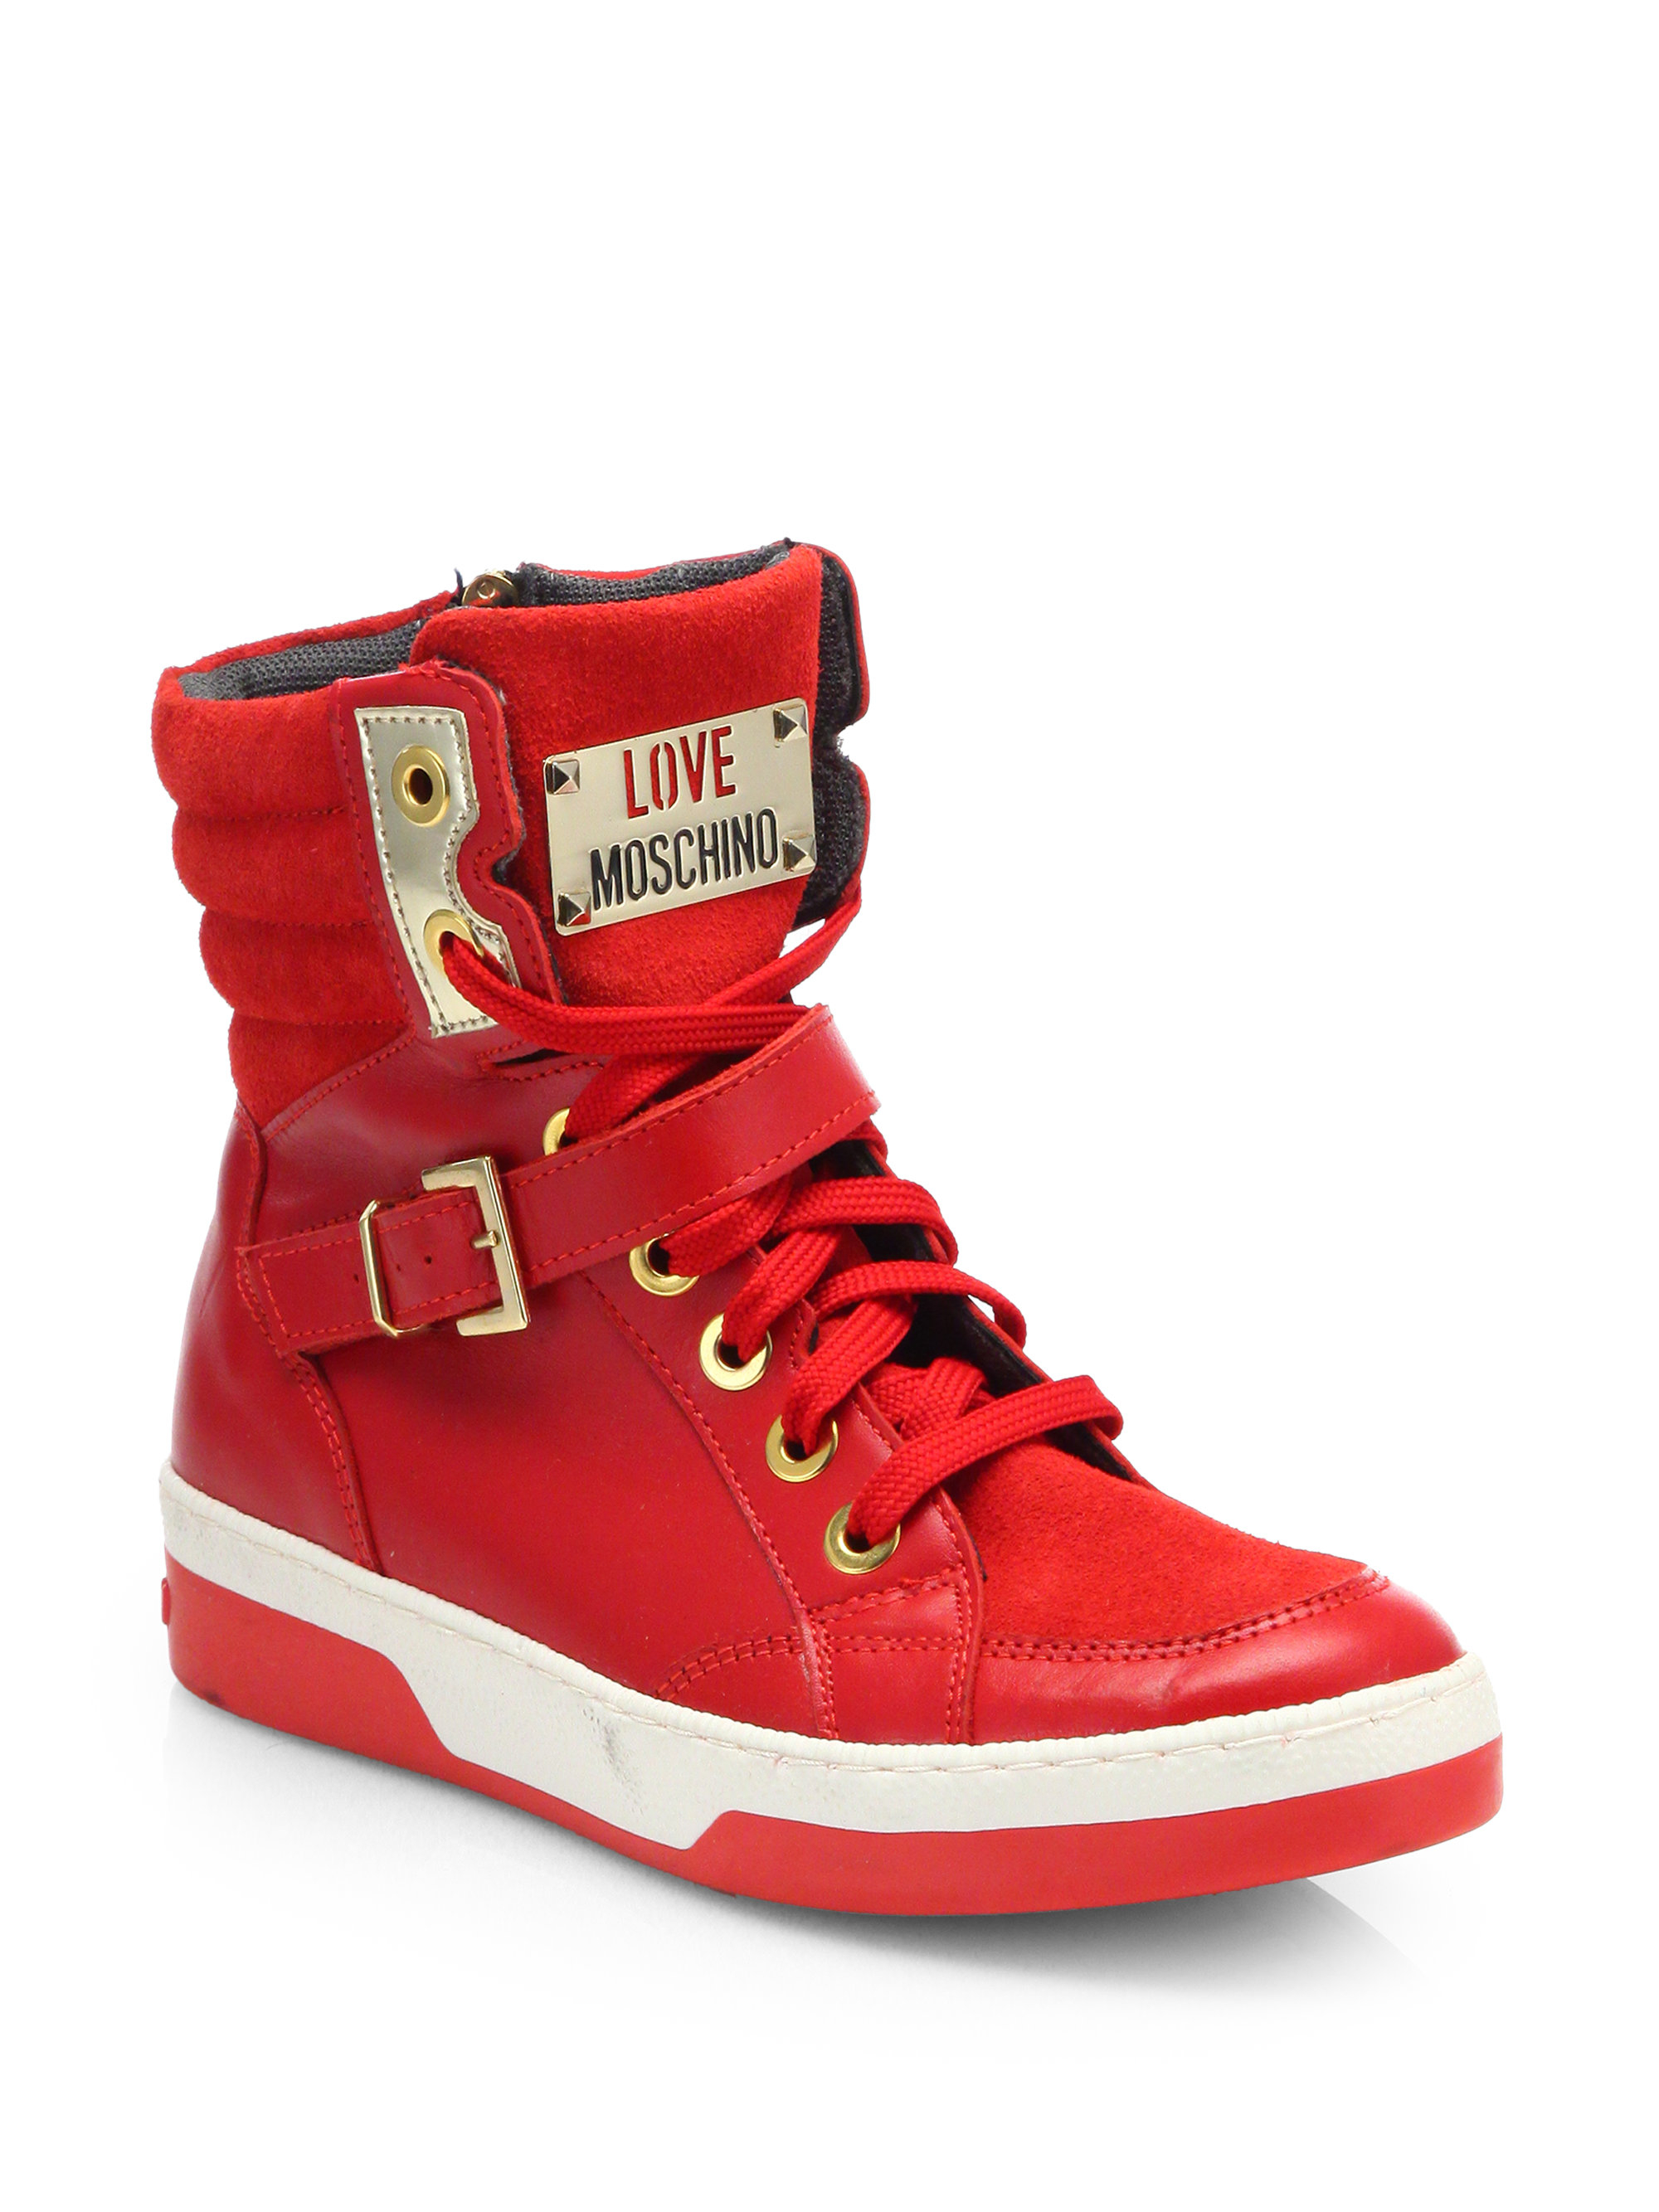 Lyst - Love Moschino Chain Leather Hightop Sneakers in Red